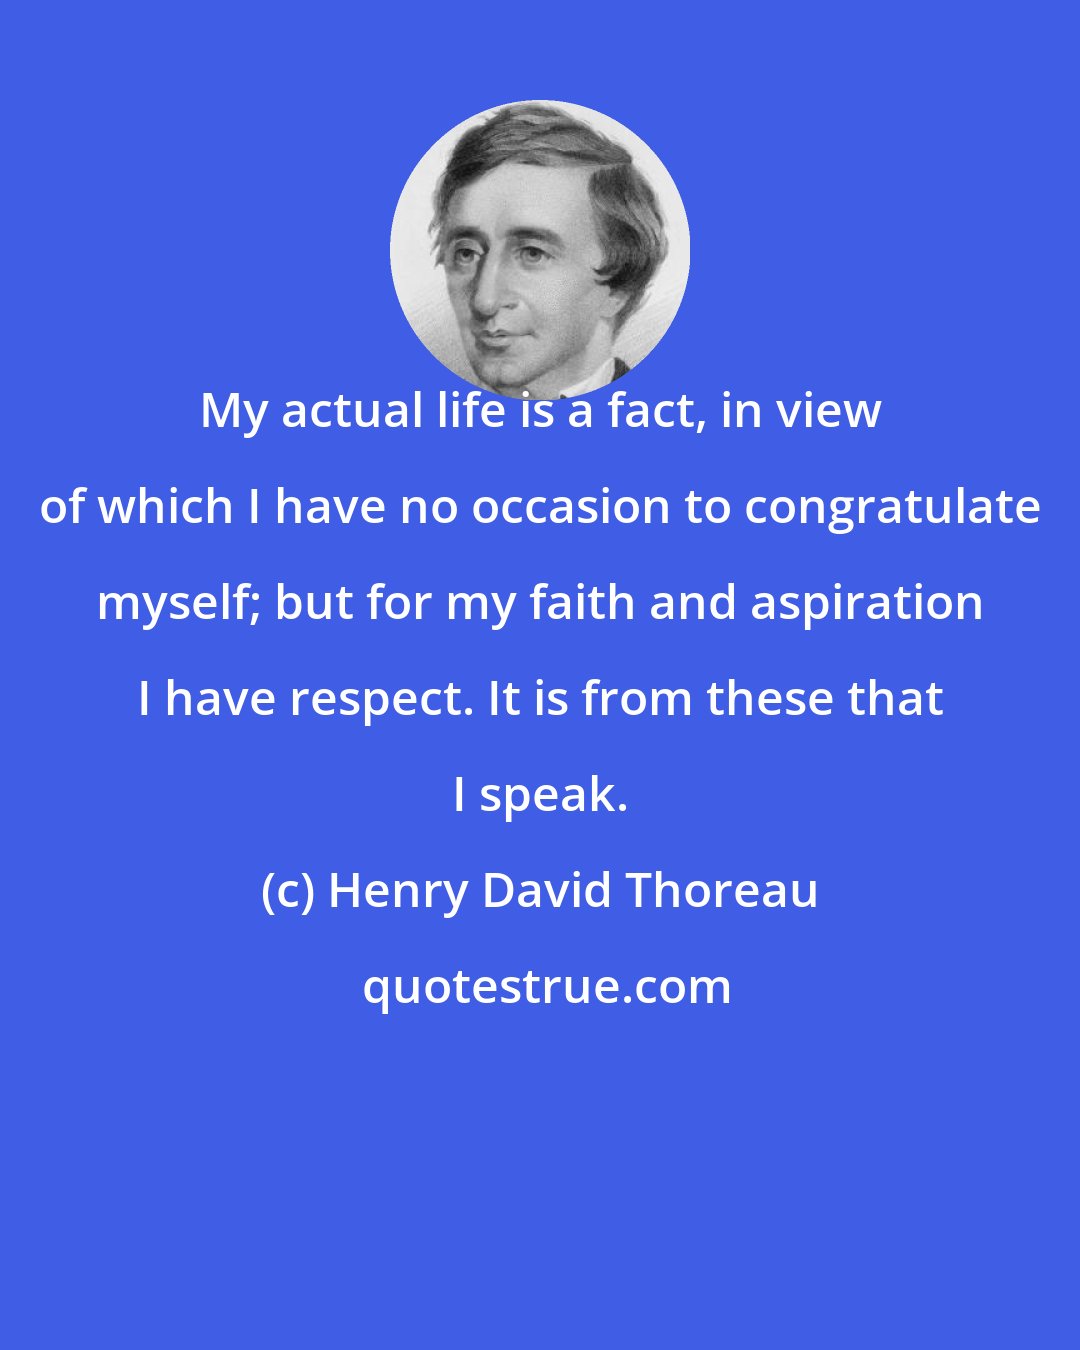 Henry David Thoreau: My actual life is a fact, in view of which I have no occasion to congratulate myself; but for my faith and aspiration I have respect. It is from these that I speak.